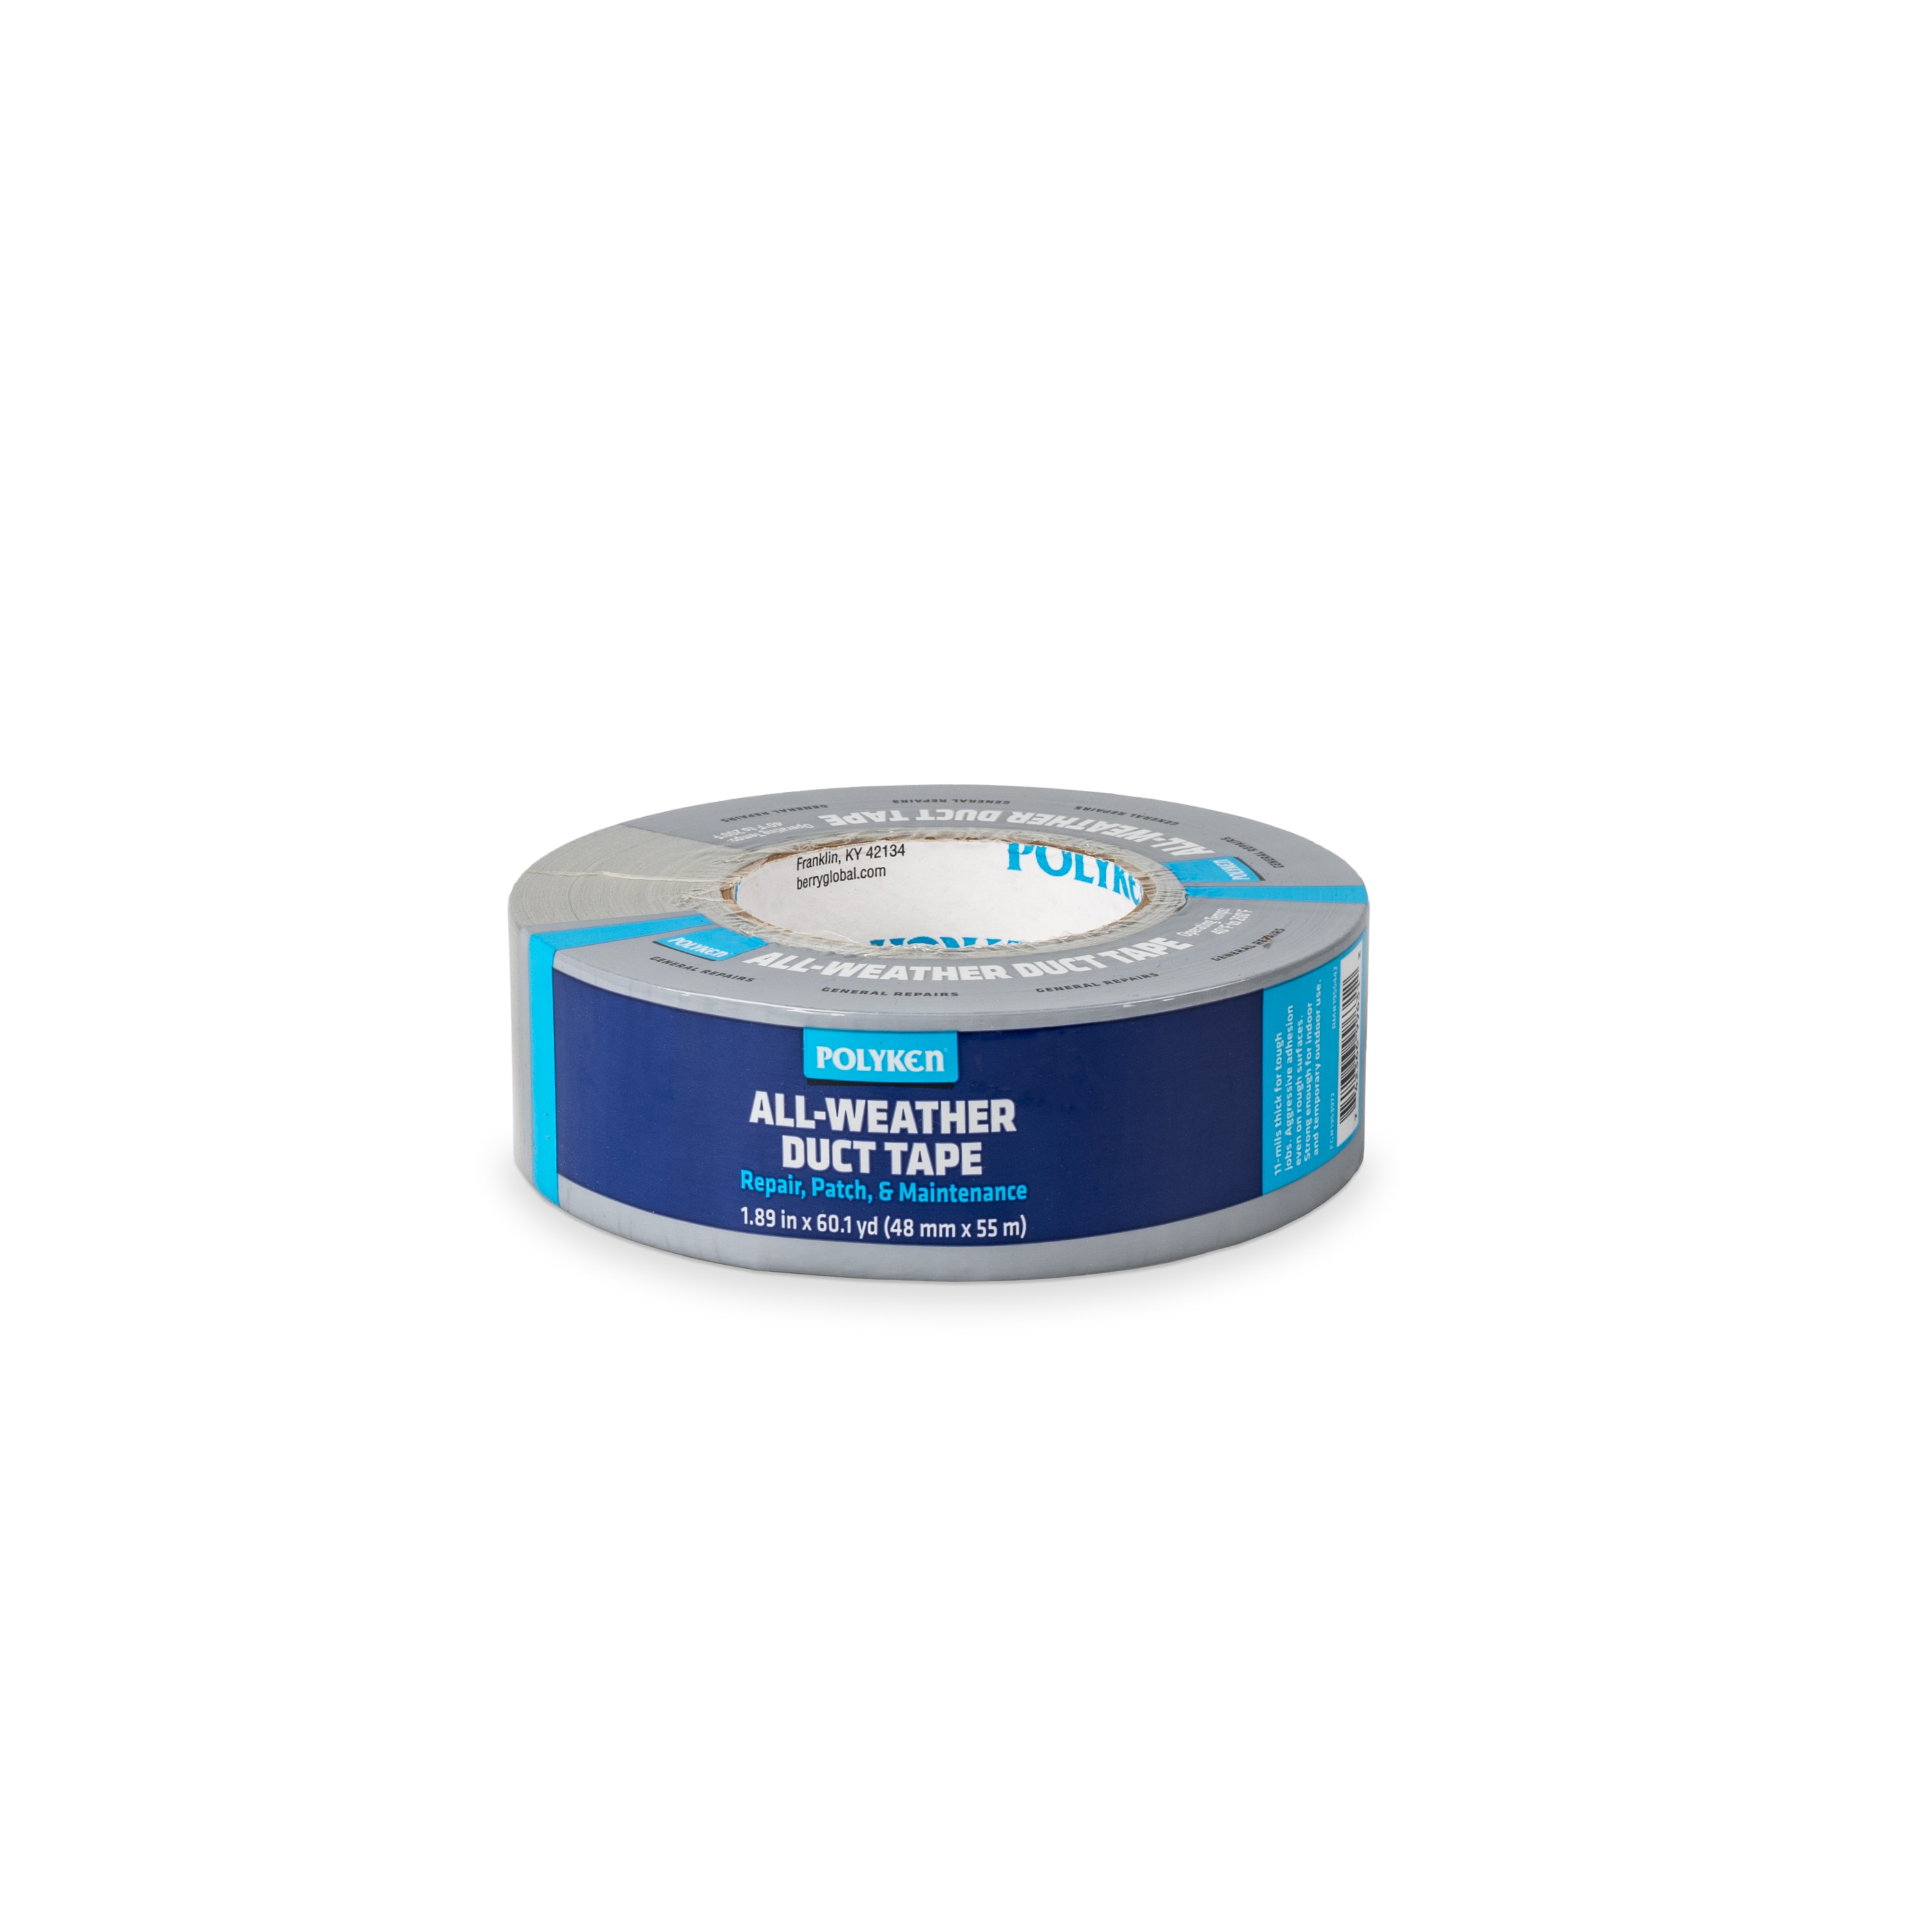 WiseBond - Self-Releasing Epoxy Tape, Extra Wide Adhesive Tape for Epoxy  Molds & River Tables, Heat Resistant Resin Tape, Medium Tack Epoxy Resin